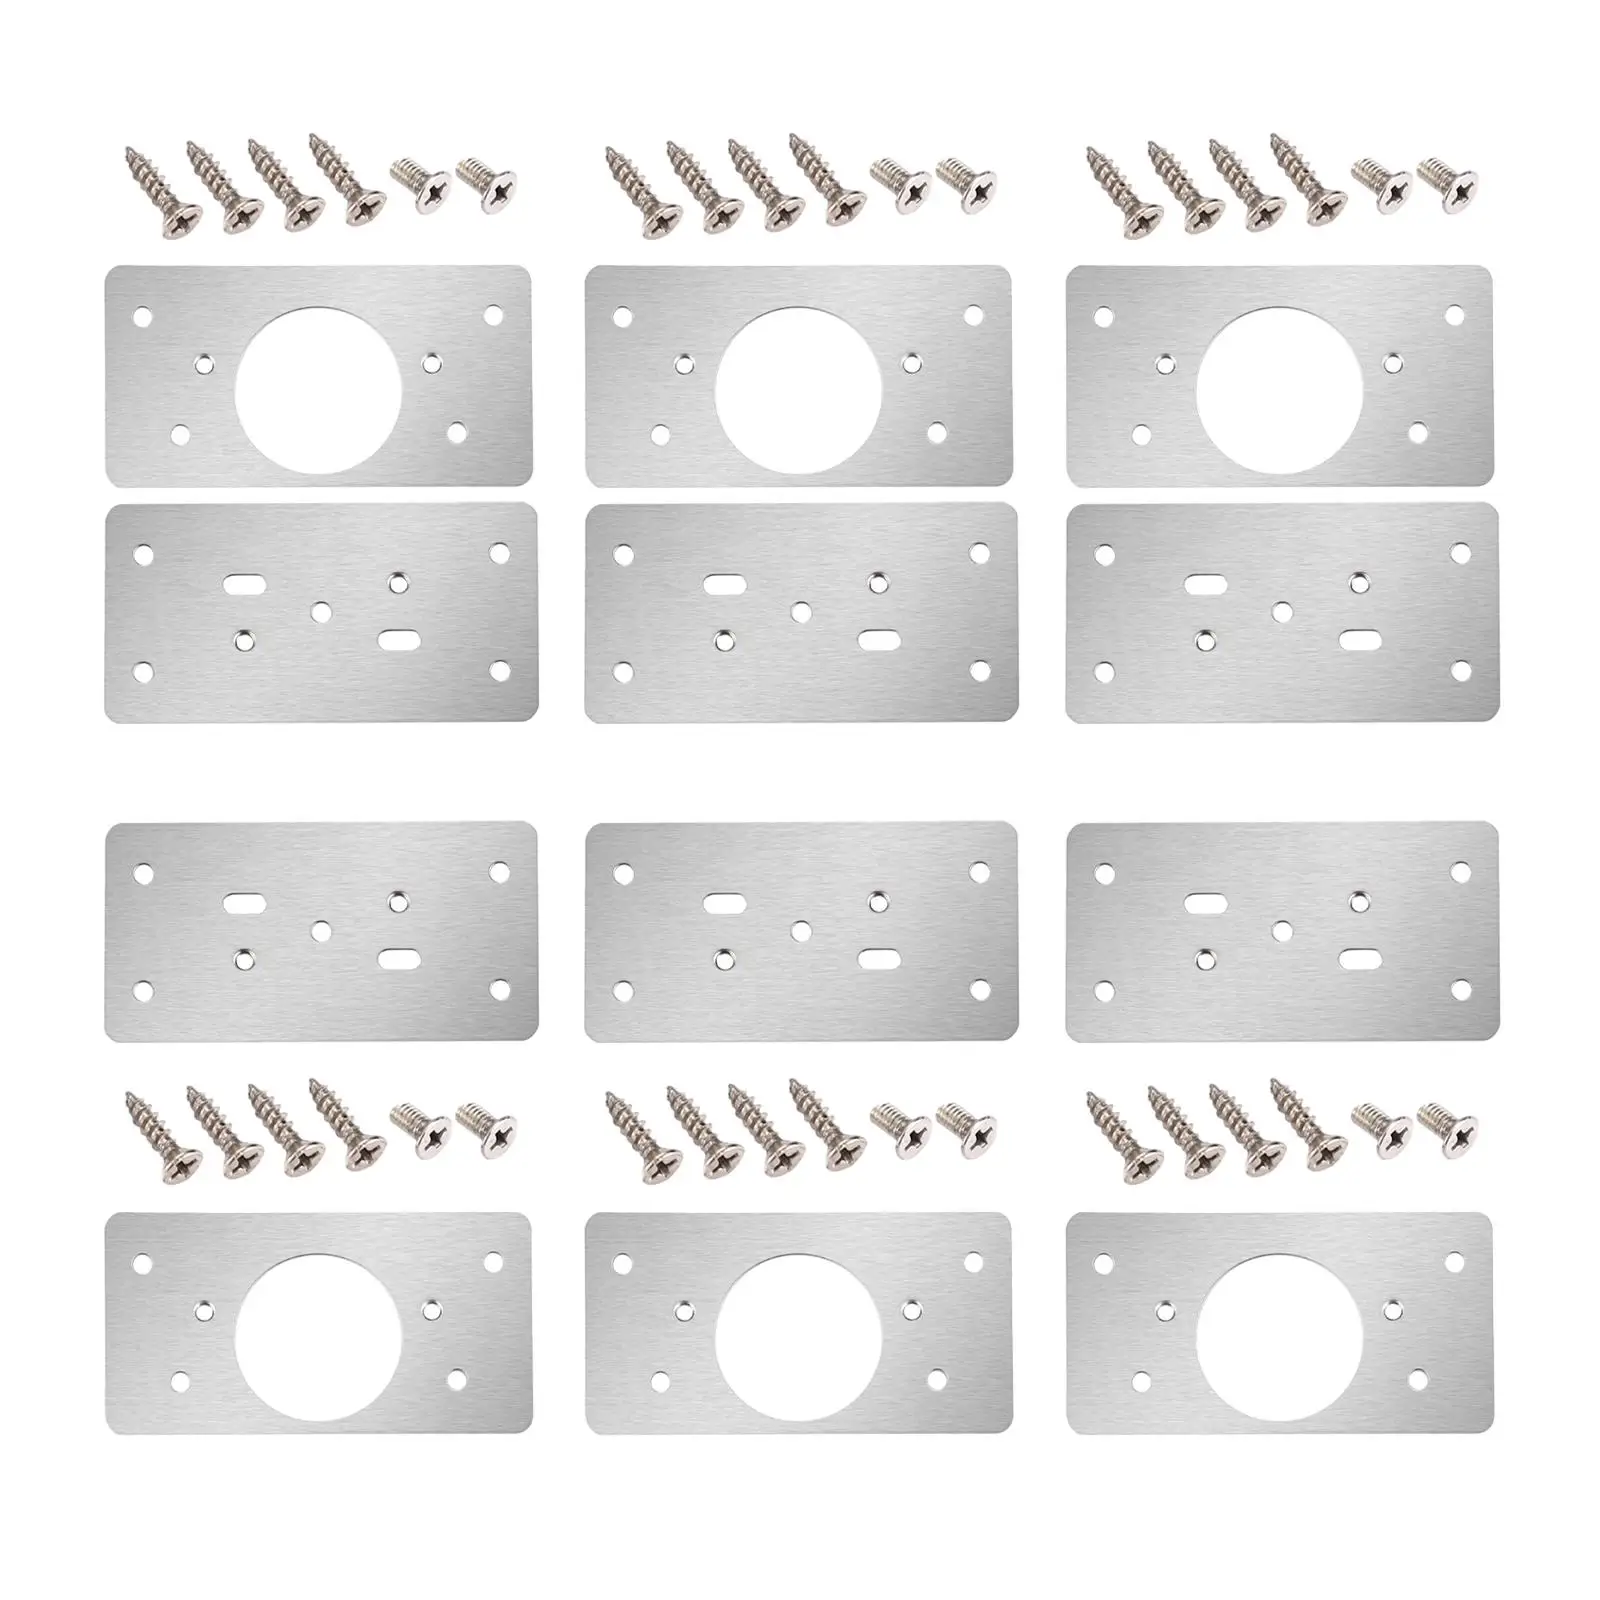 6 Pieces Hinge Repair Kits with Holes Hinges Fixing Plates with Mounting Screws for Door Wardrobe Window Wood Furniture Drawer